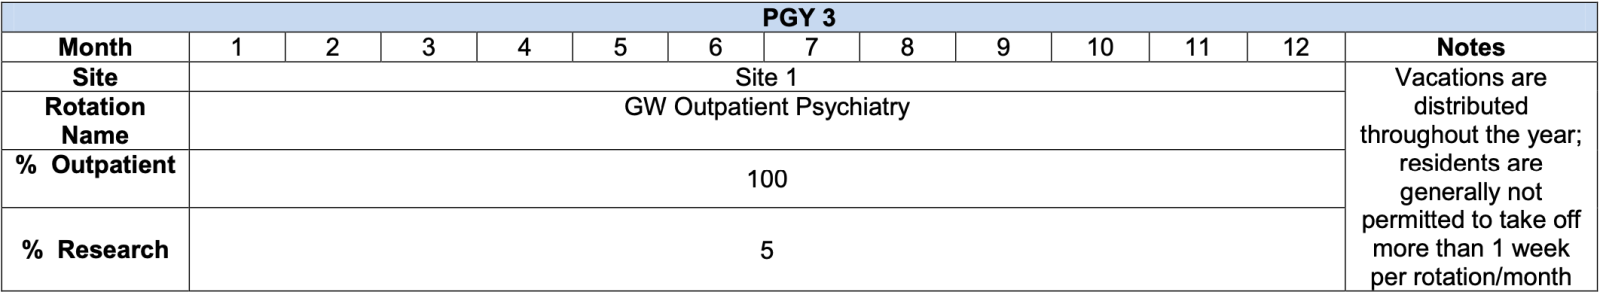 PGY3 schedule